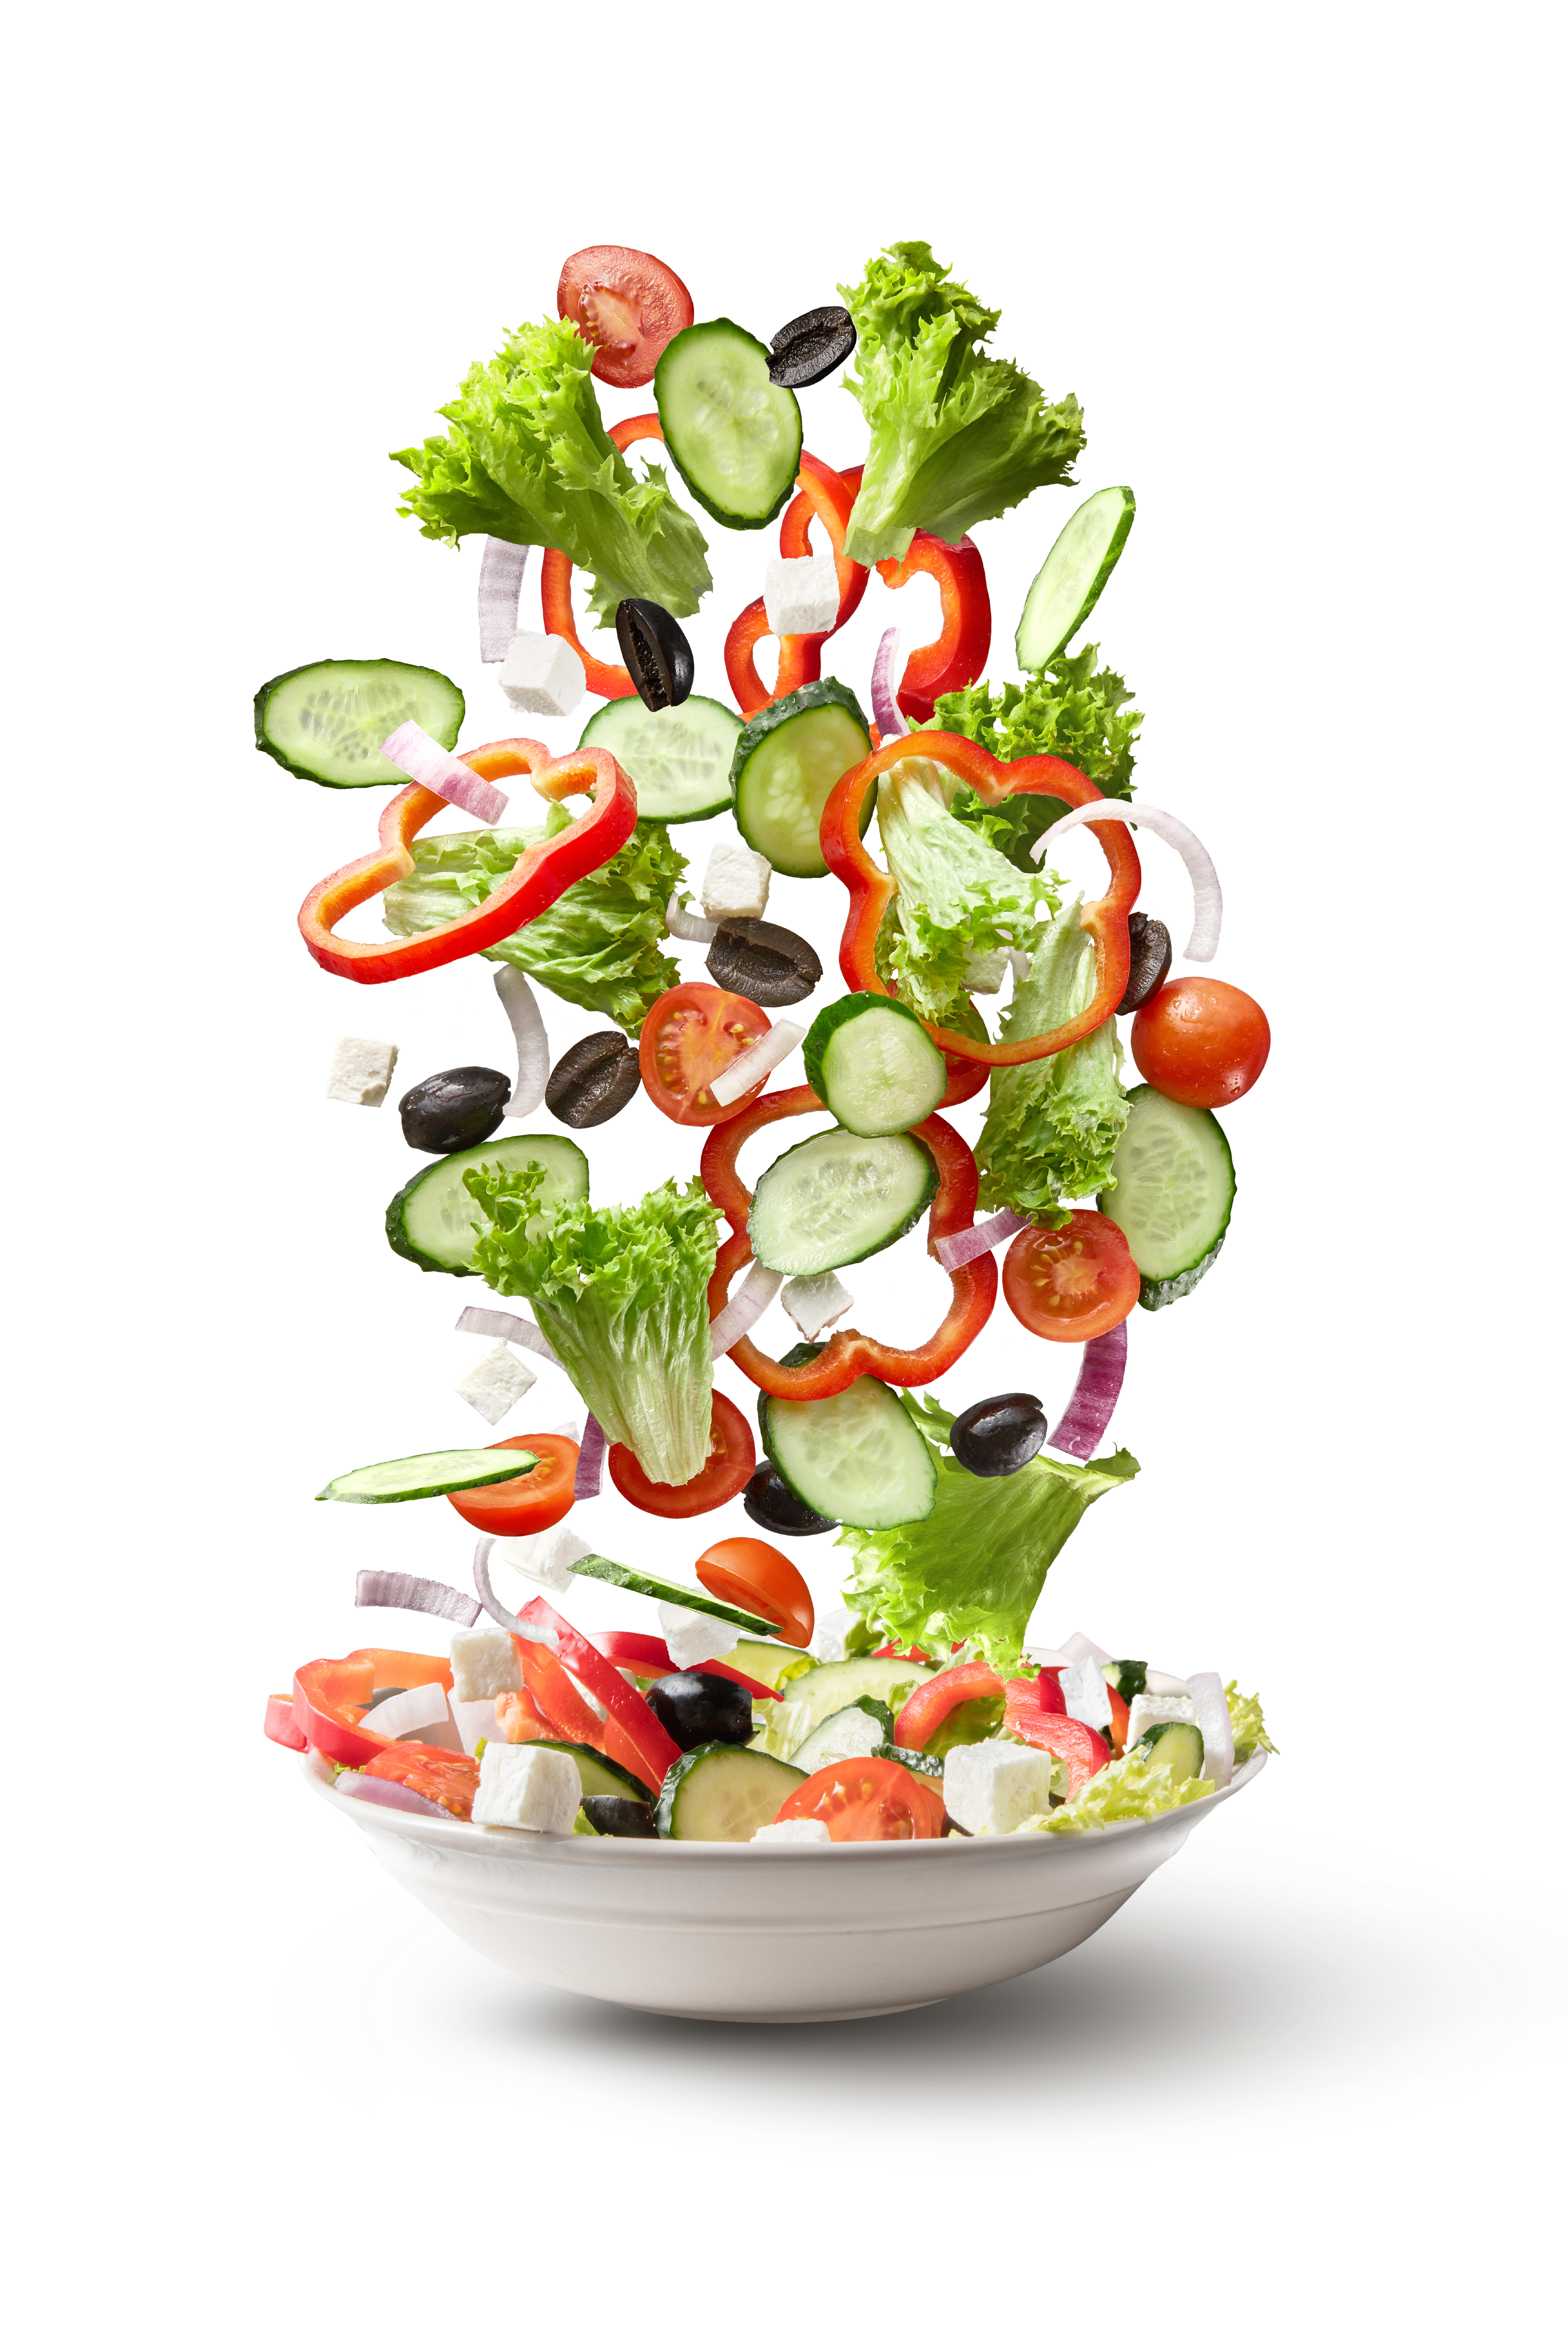 A Ranking of the Best Salads . . . Other Than “No Salad,” of Course